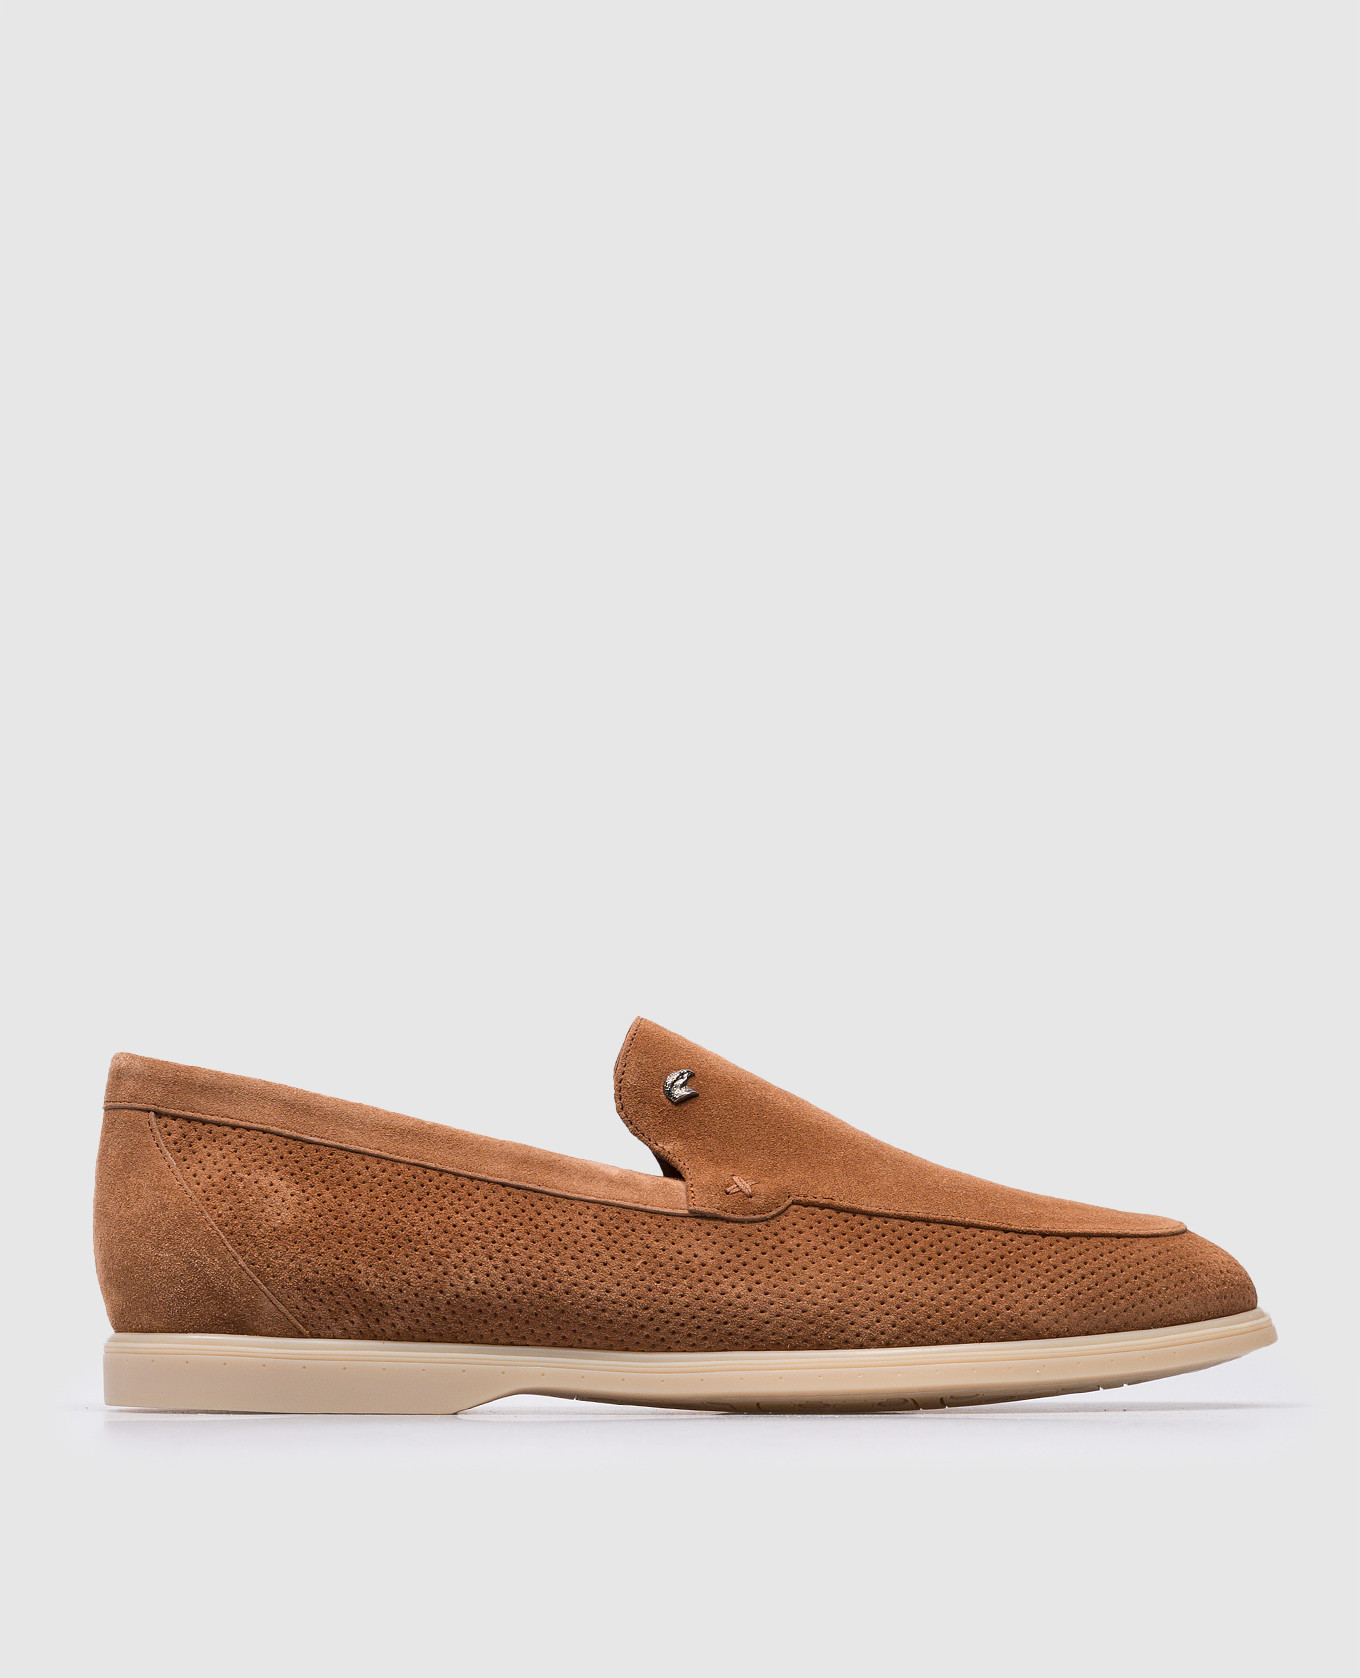 Brown suede loafers with metallic logo patch